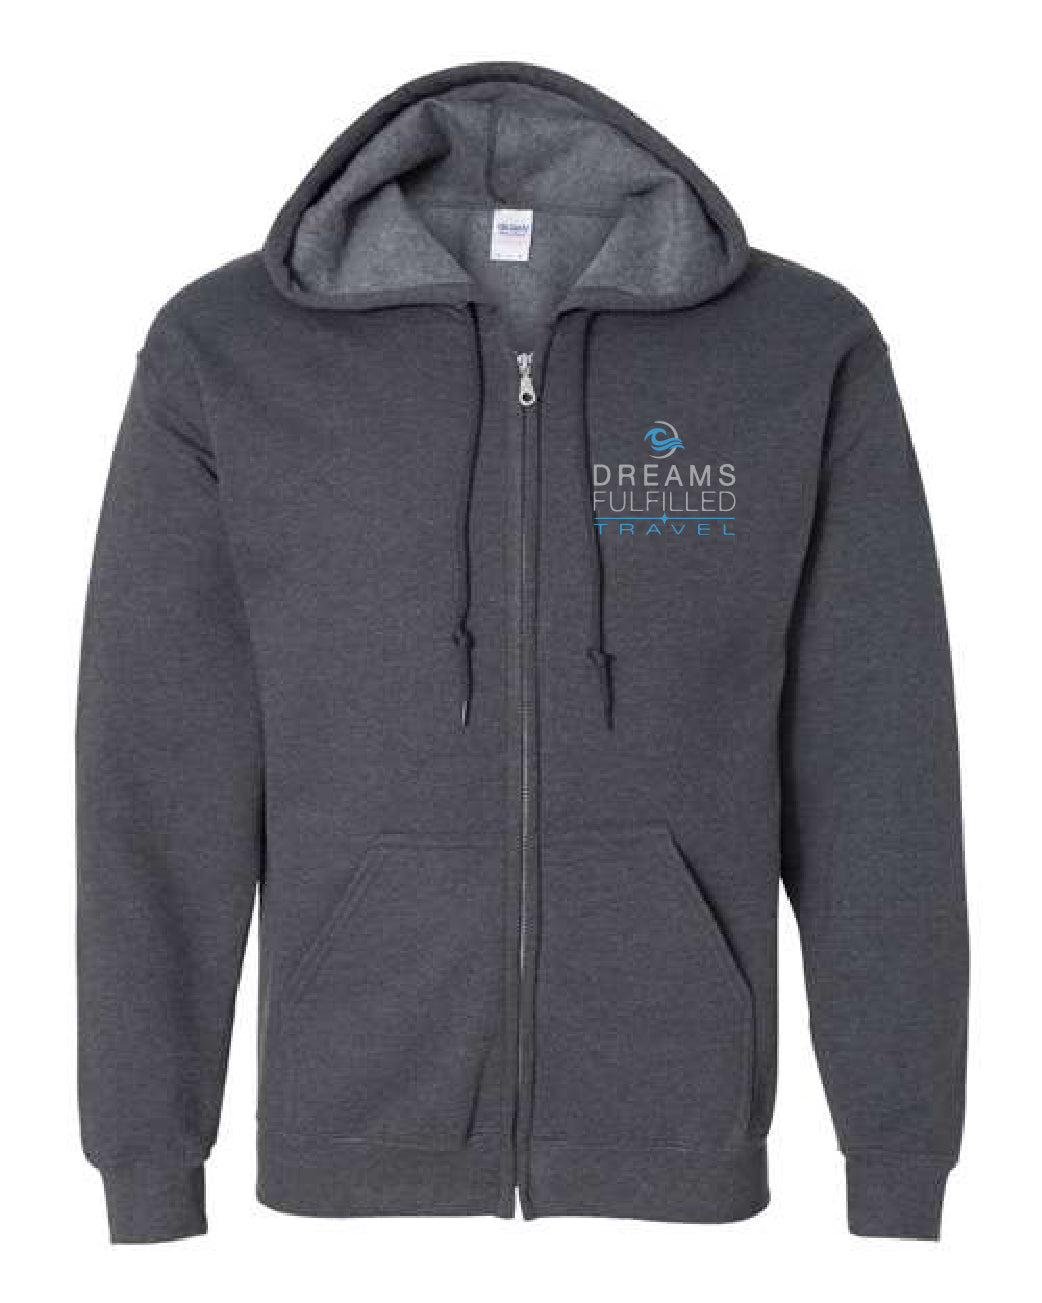 Dreams Fulfilled Travel Zip Up